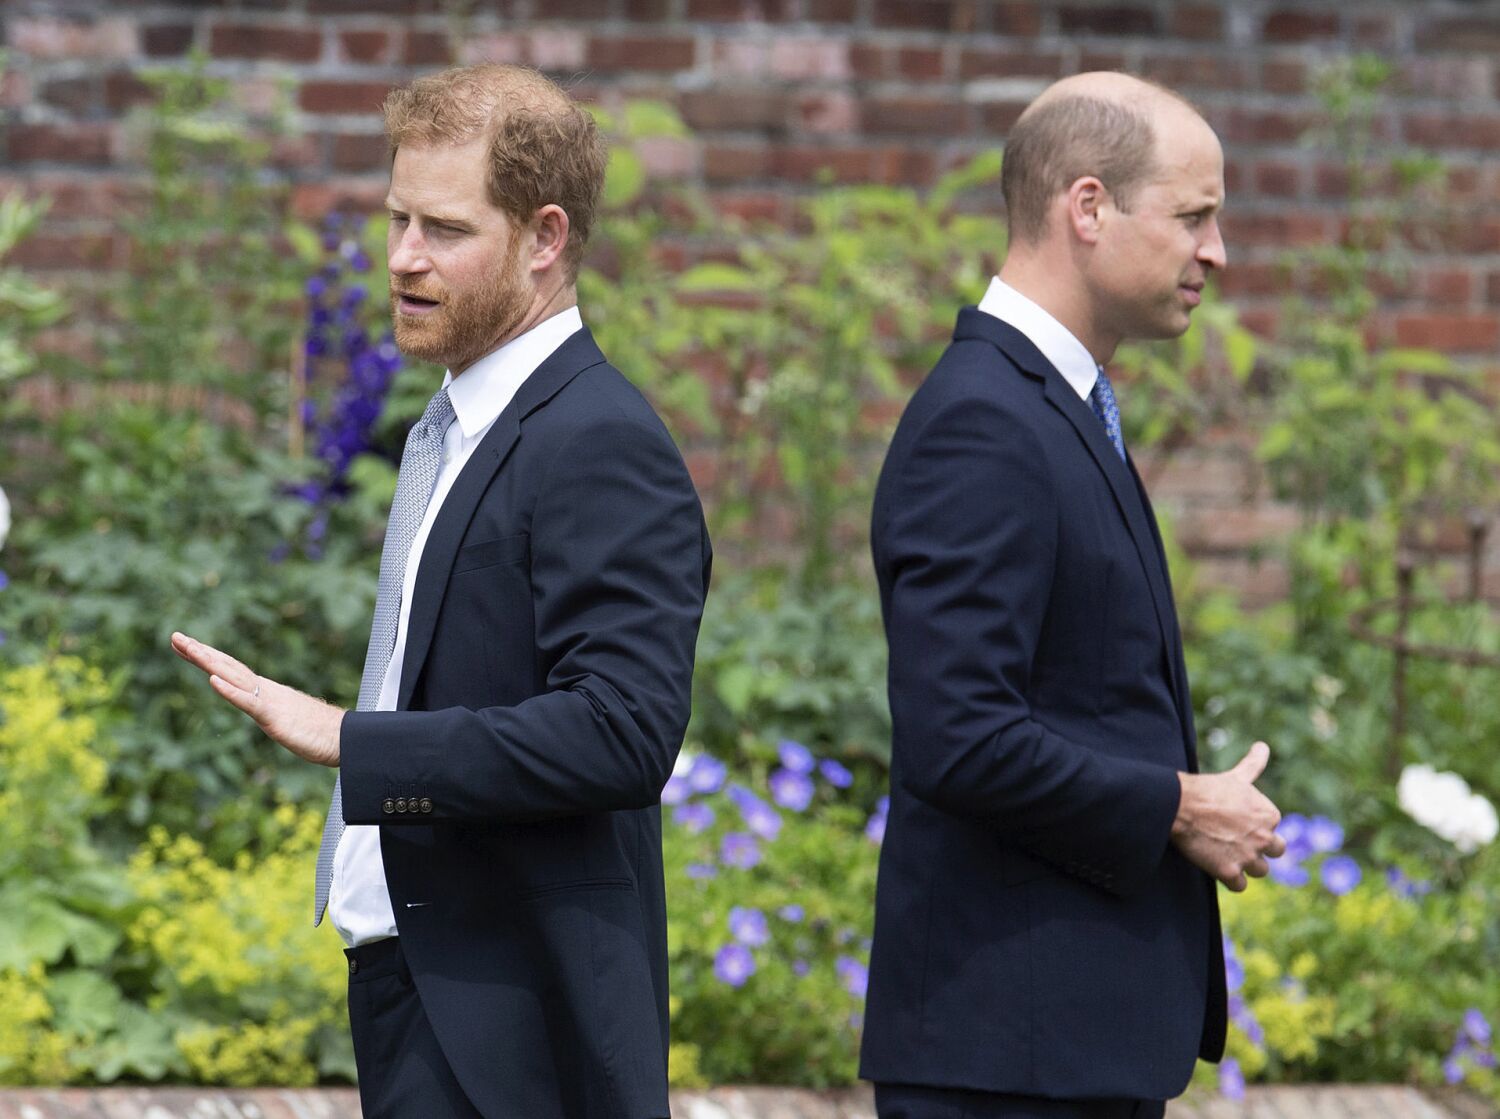 Did the heir physically attack the spare? That's what Prince Harry alleges in memoir